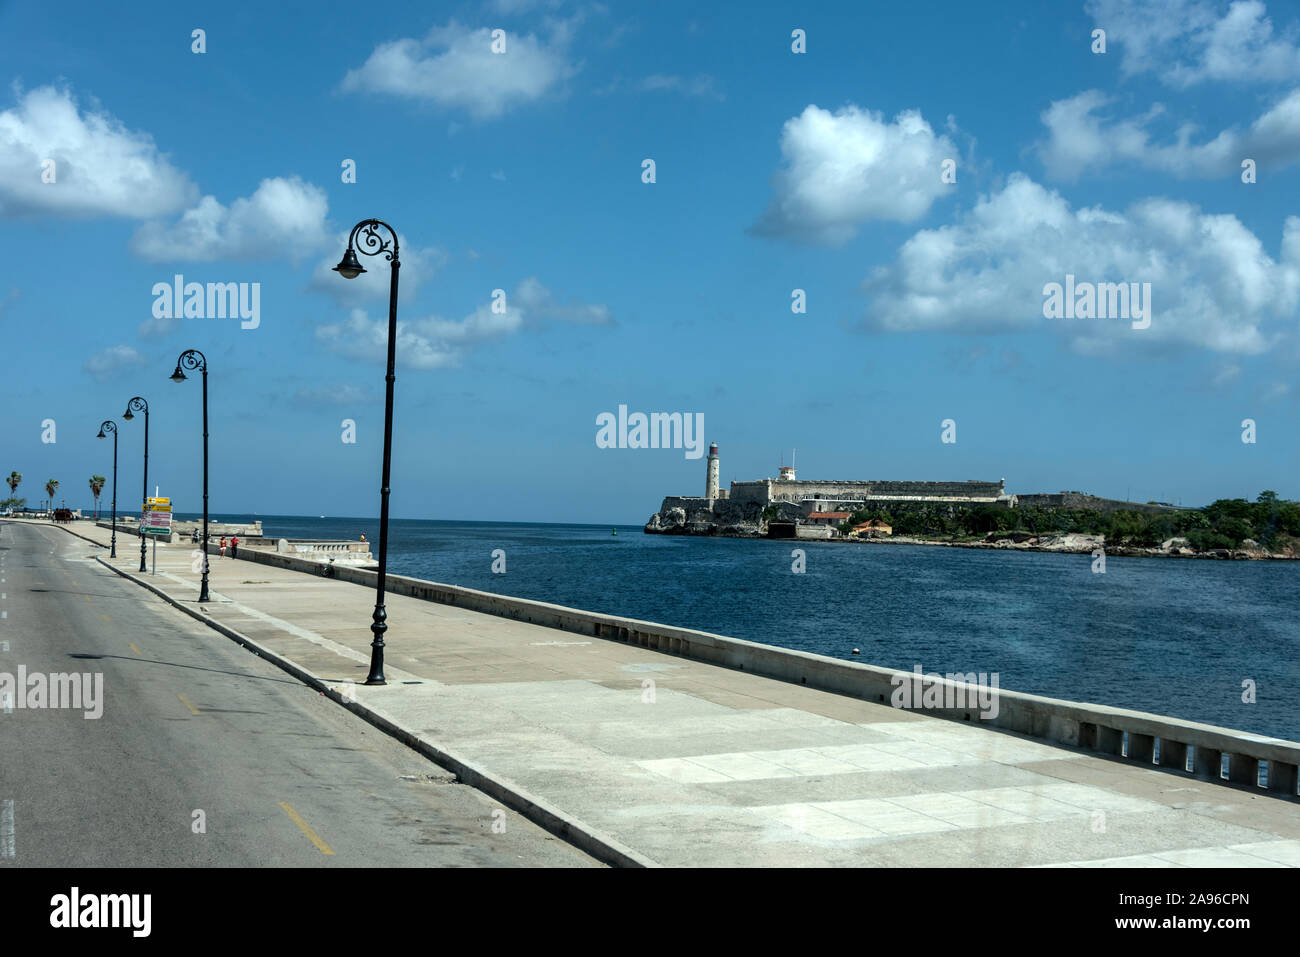 The coastal road that connects with the city’s waterfront, Malecion is ‘Calle 1ra’, facing Havana harbour and the landmark of Castillo De Los Tres Rey Stock Photo